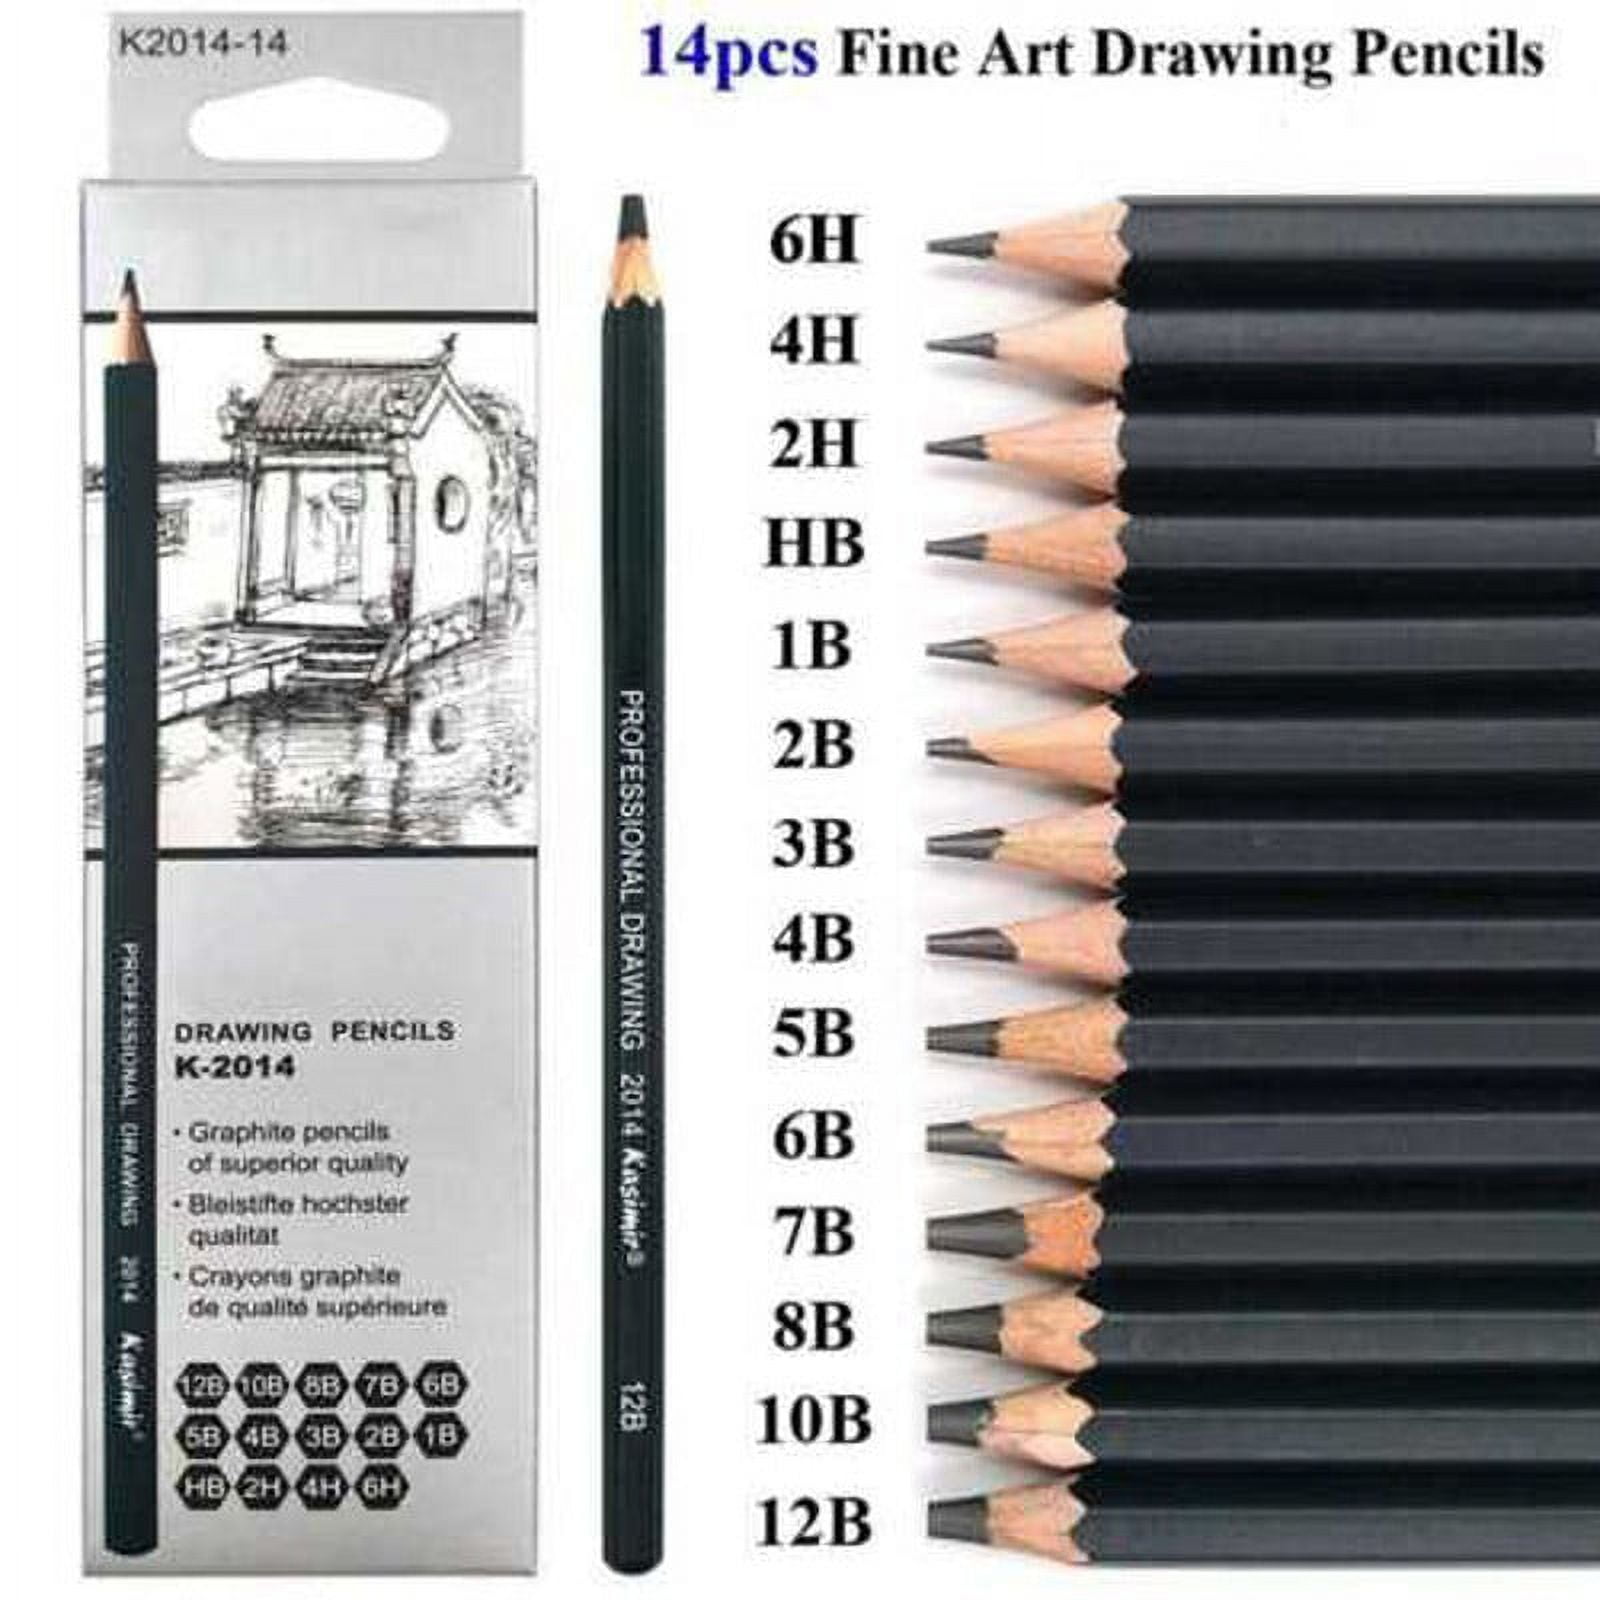  Arrtx Drawing Pencils 14 Pack (4H - 8B), Art Sketching Pencils  for Drawing and Shading, Sketch Pencils Set for Artists Beginners